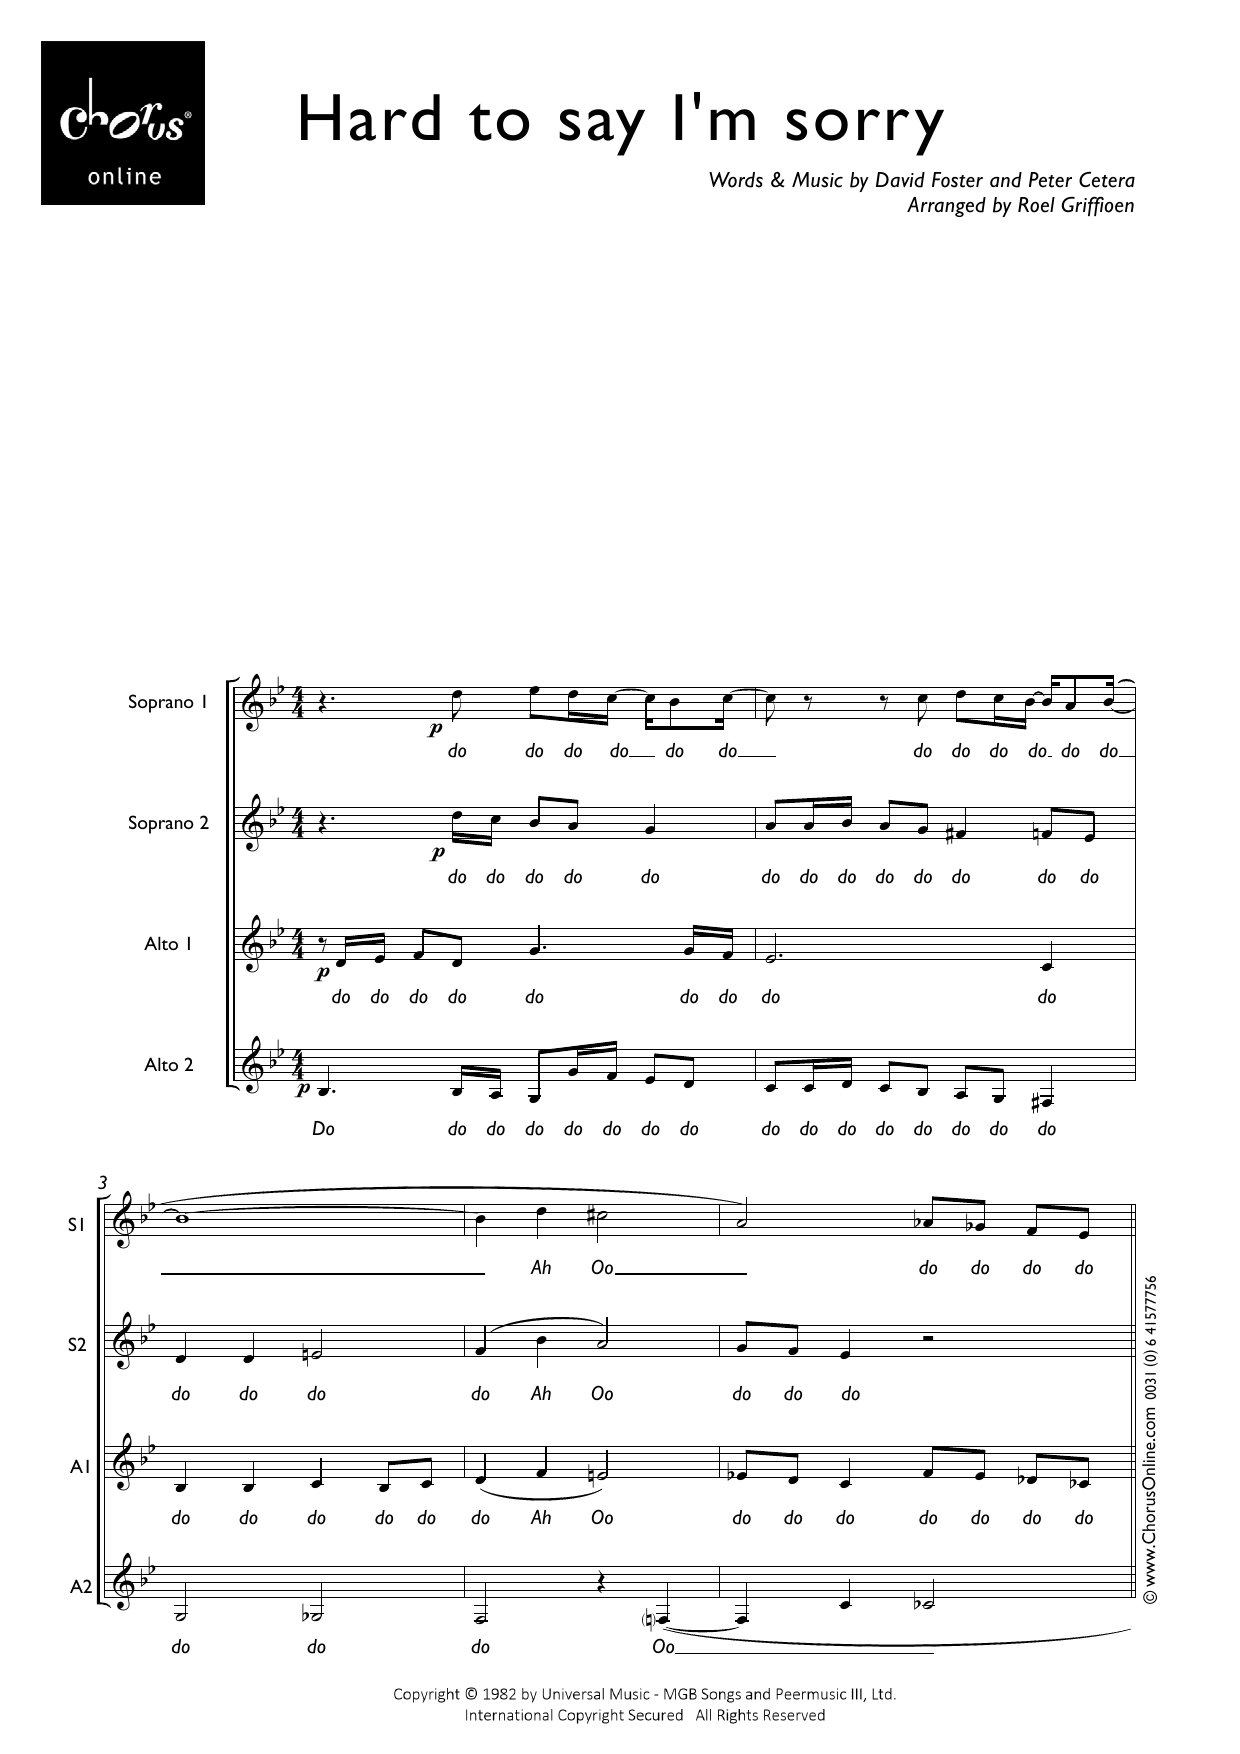 Chicago Hard to Say I'm Sorry (arr. Roel Griffioen) sheet music notes printable PDF score